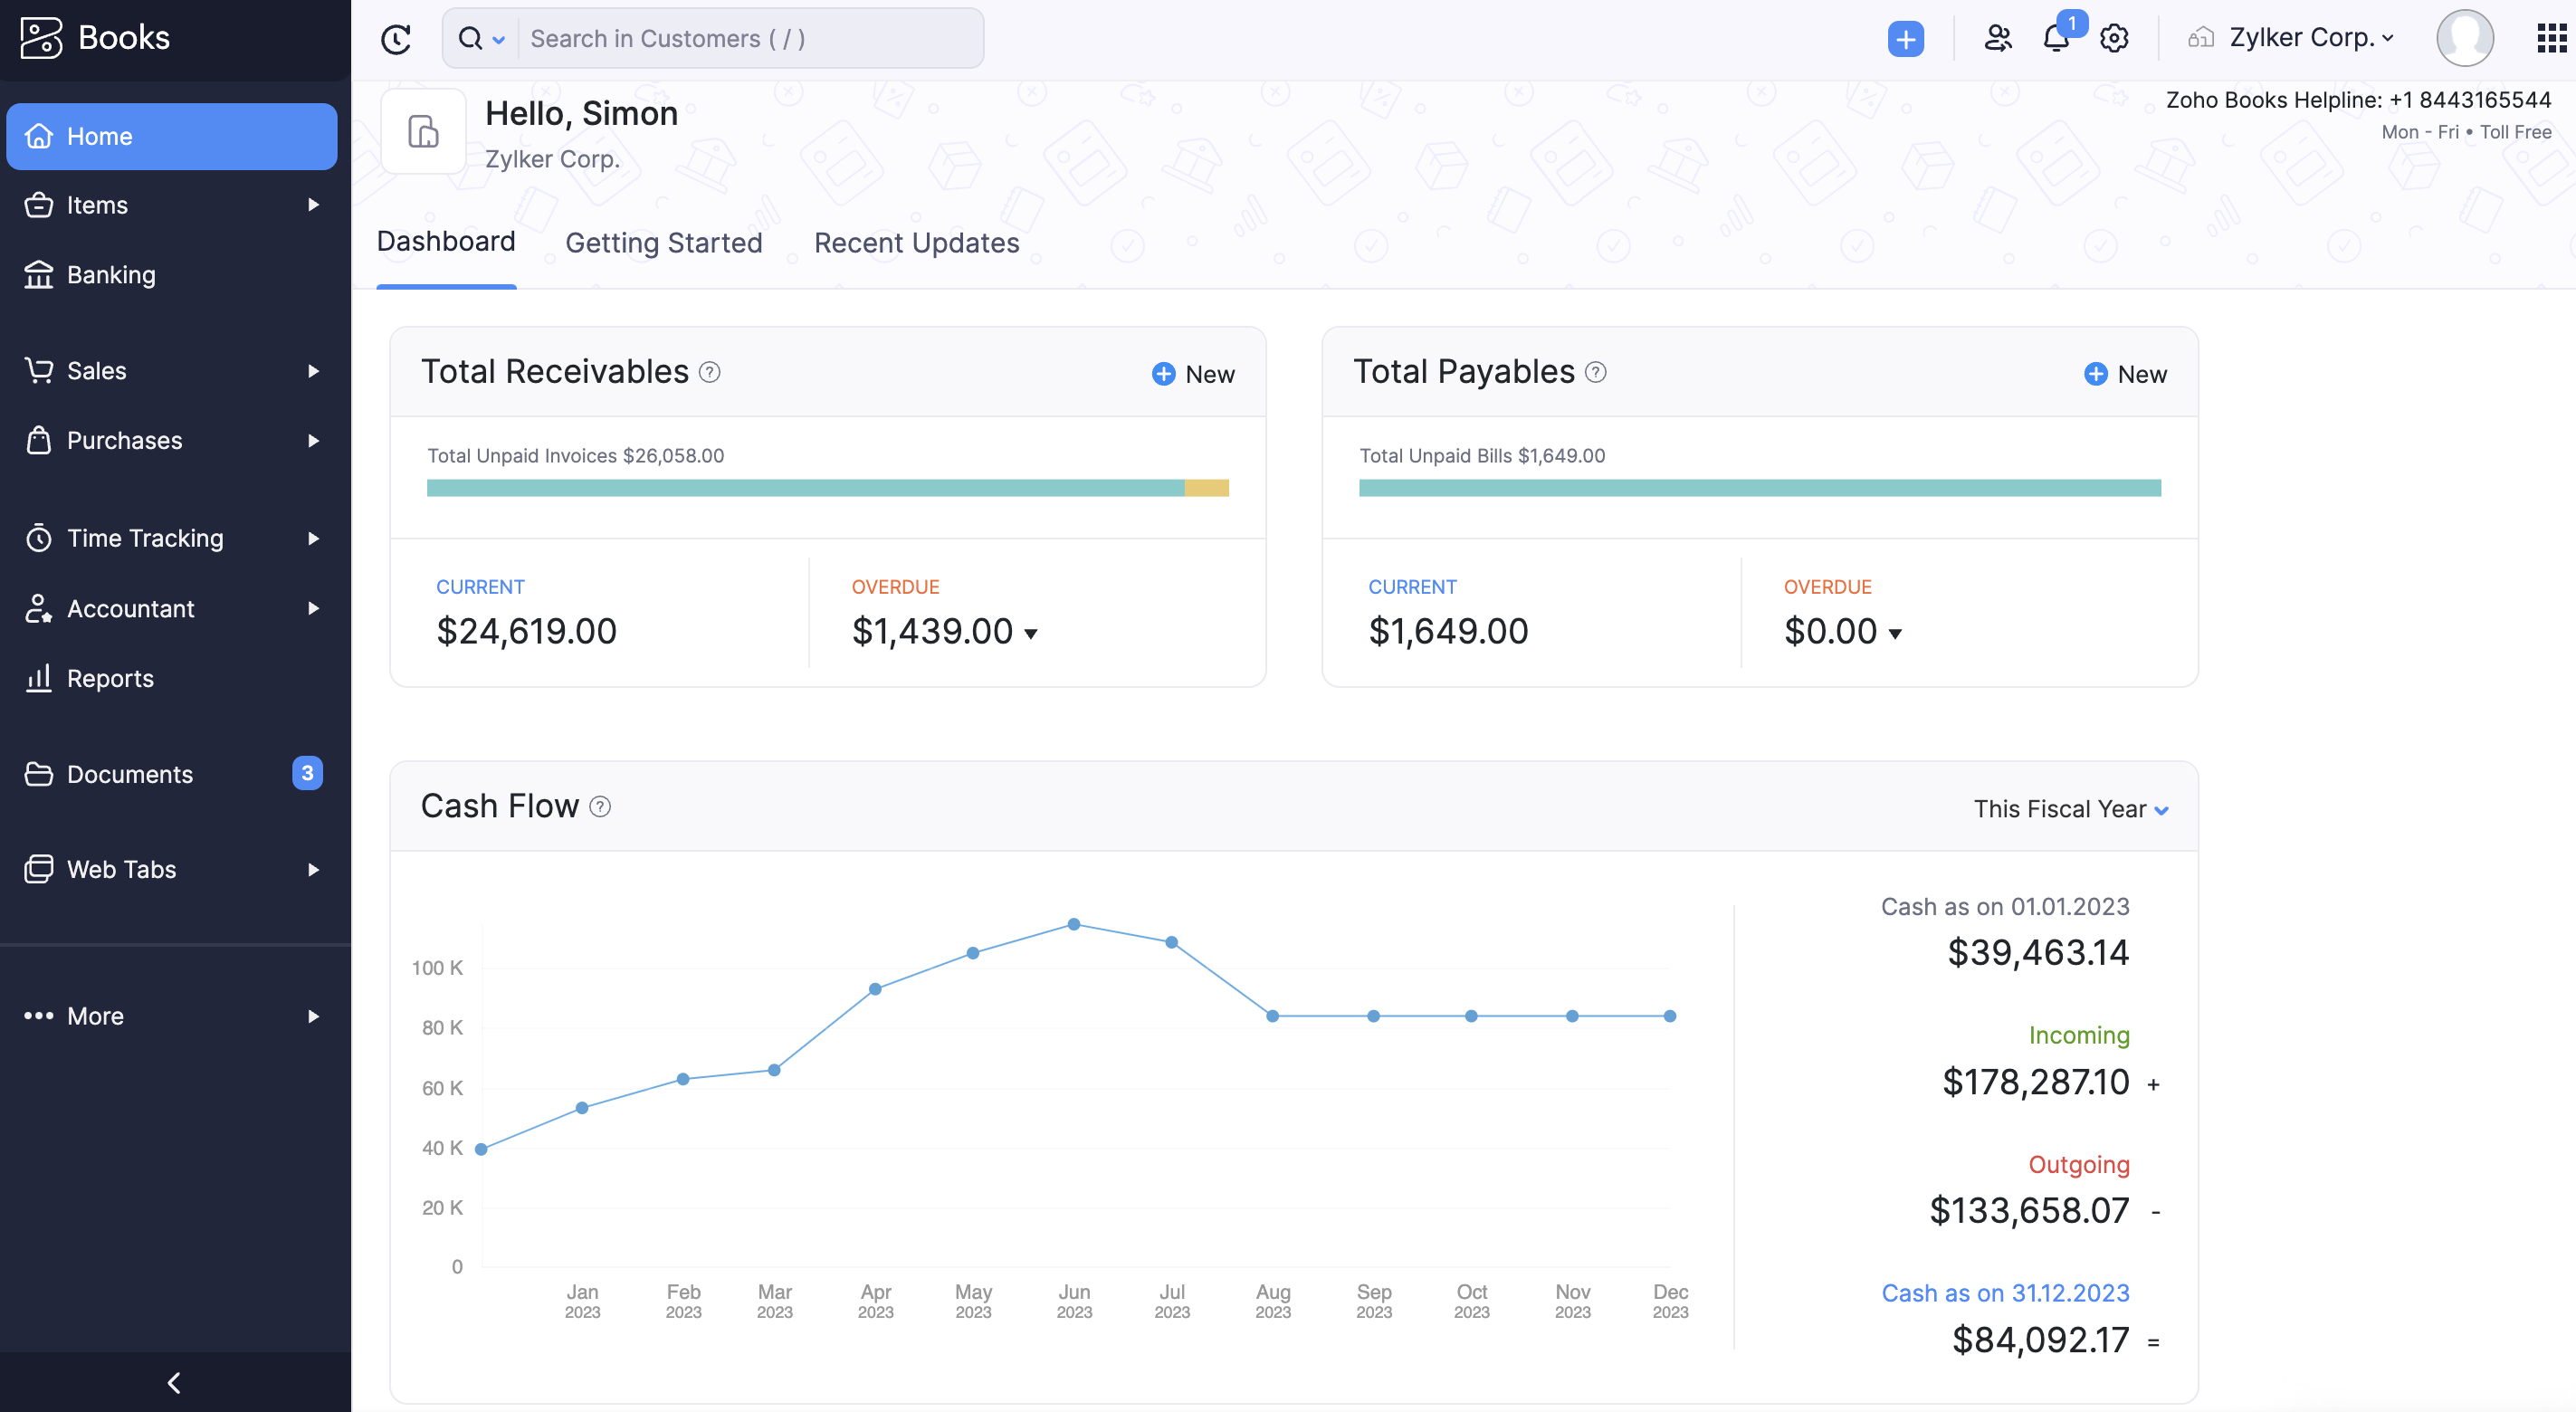 Zoho Books: Comprehensive Cloud Accounting Solution for Small and Midmarket Businesses - Techaisle Blog - Techaisle - Global SMB, Midmarket and Channel Partner Market Research Organization zoho-books-dashboard 